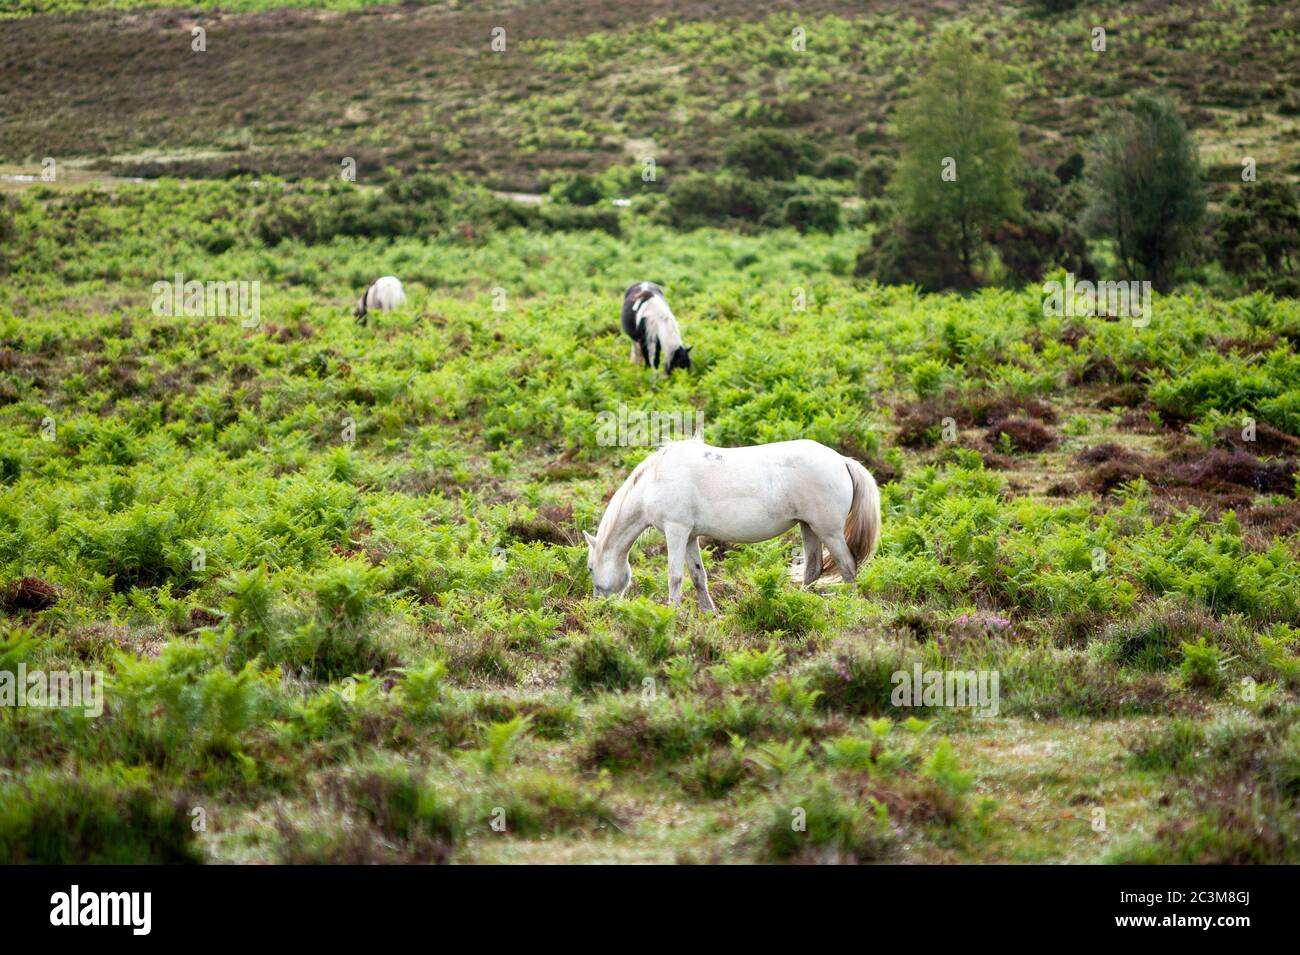 Godshill, New Forest, Hampshire, UK, 21st June 2020, Weather: The morning after summer solstice 2020 which saw heavy rain during the night. Clouds are breaking to allow the sun to shine through and the resident animals feed on the lush damp vegetation. Credit: Paul Biggins/Alamy Live News Stock Photo